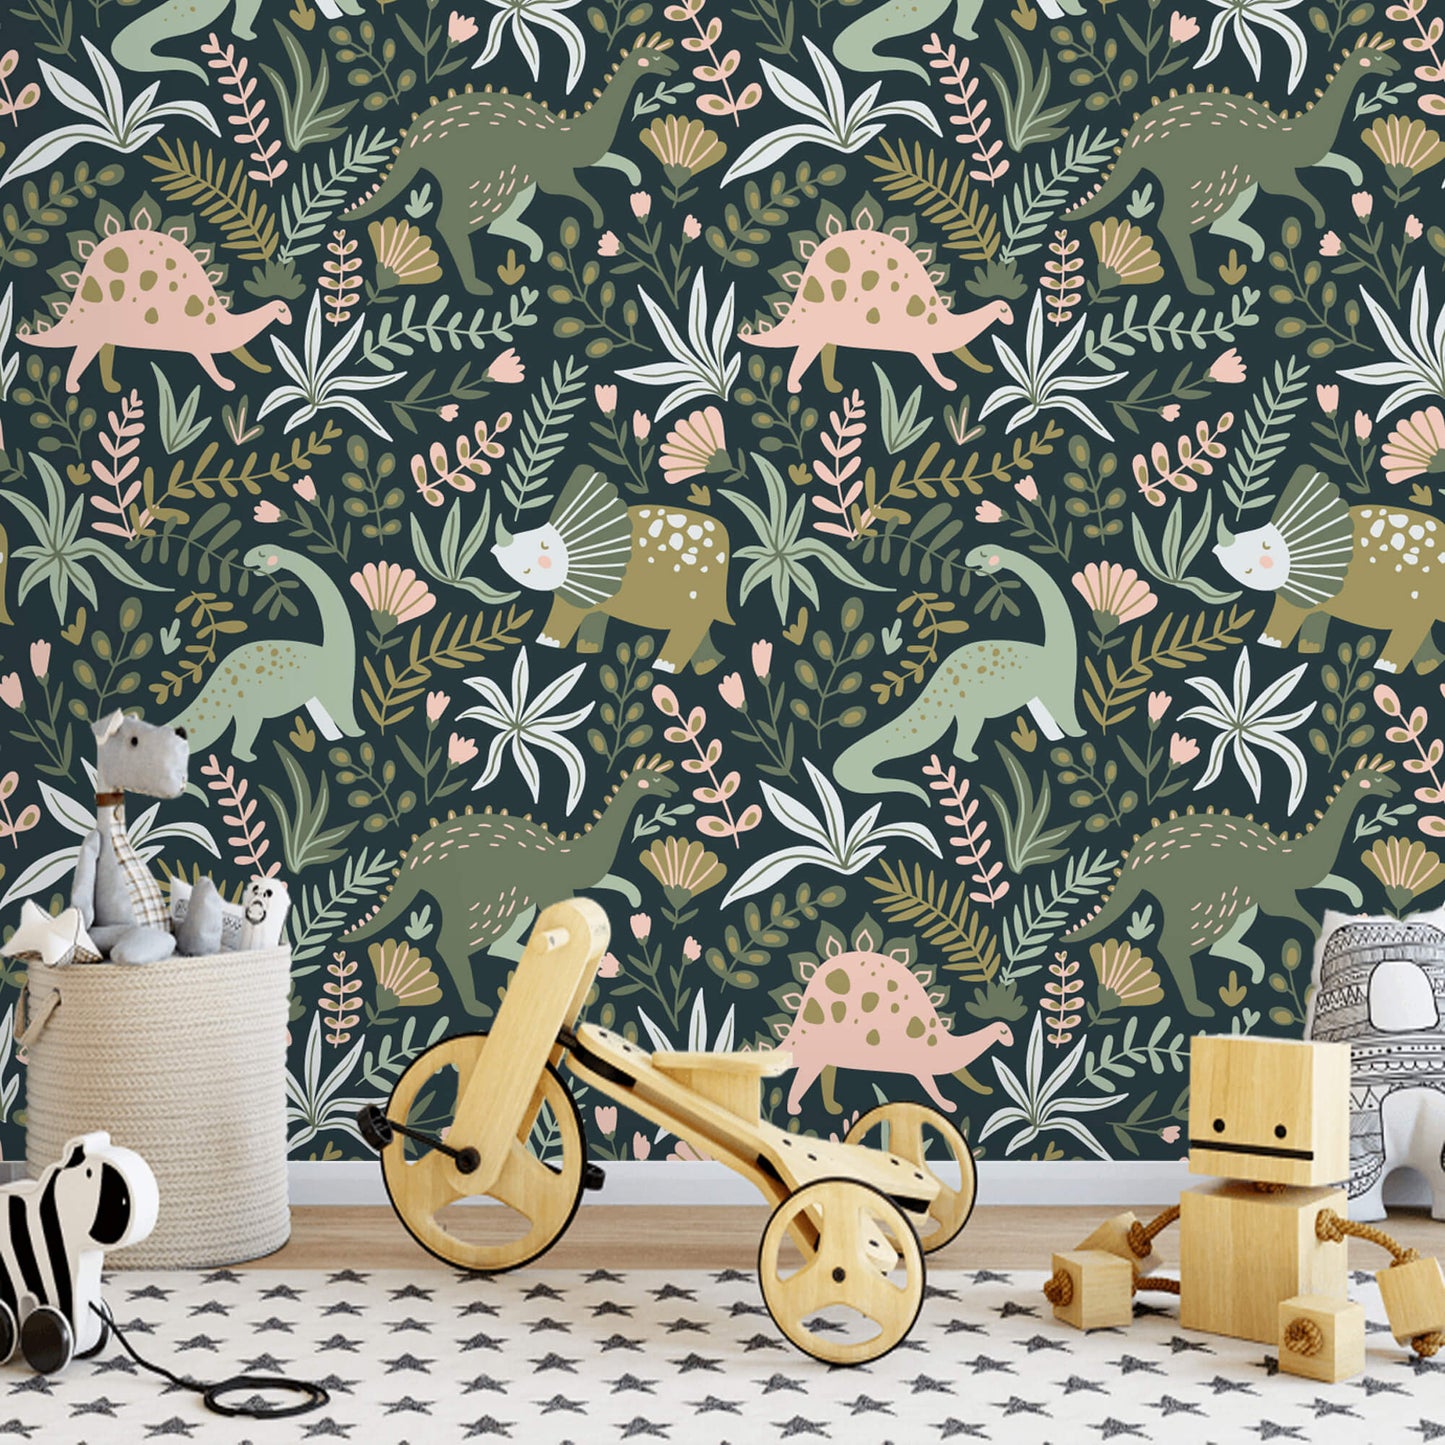 Dino Garden Oasis Wallpaper: Transform your child's room into a prehistoric paradise with this playful design, featuring adorable dinosaurs frolicking amidst lush greenery, creating a whimsical and imaginative oasis.